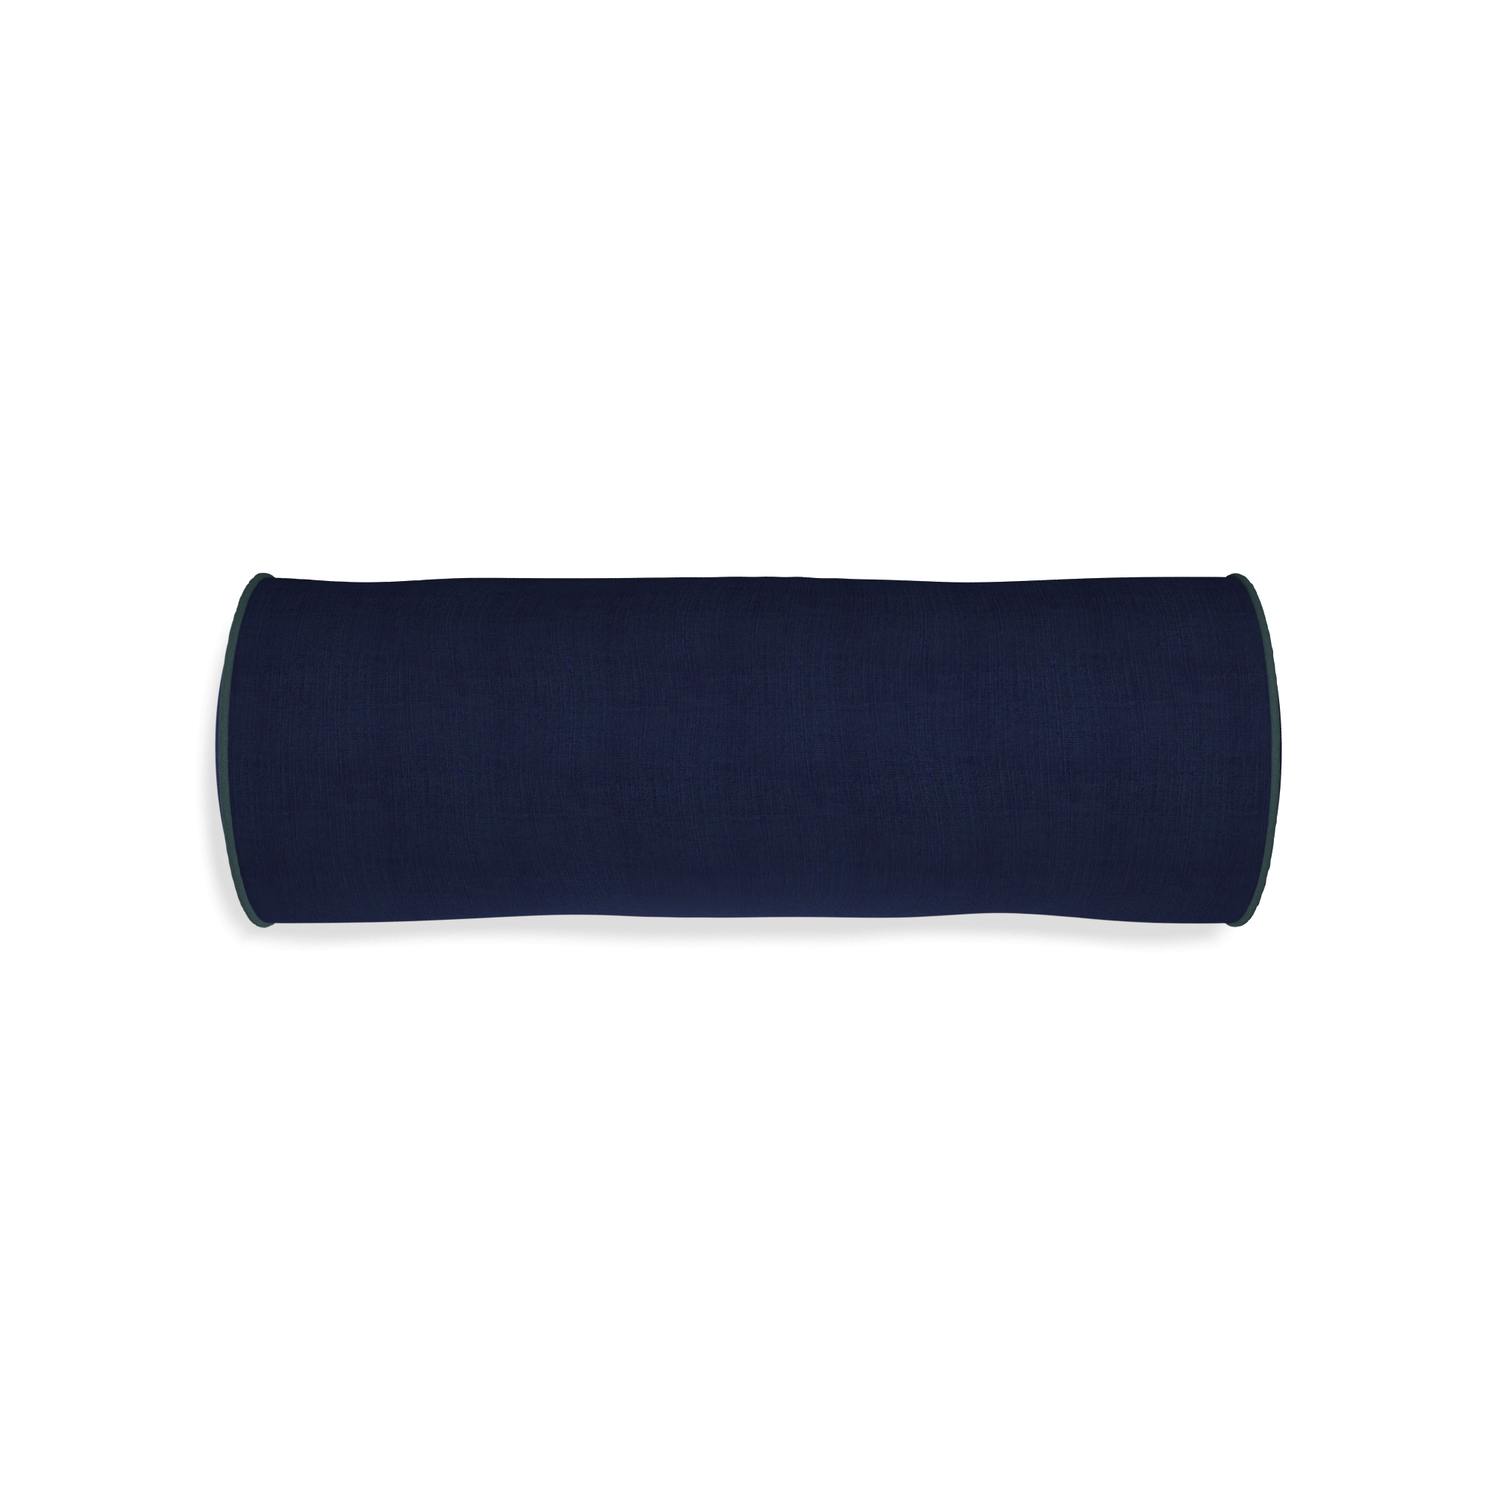 Bolster midnight custom navy bluepillow with p piping on white background